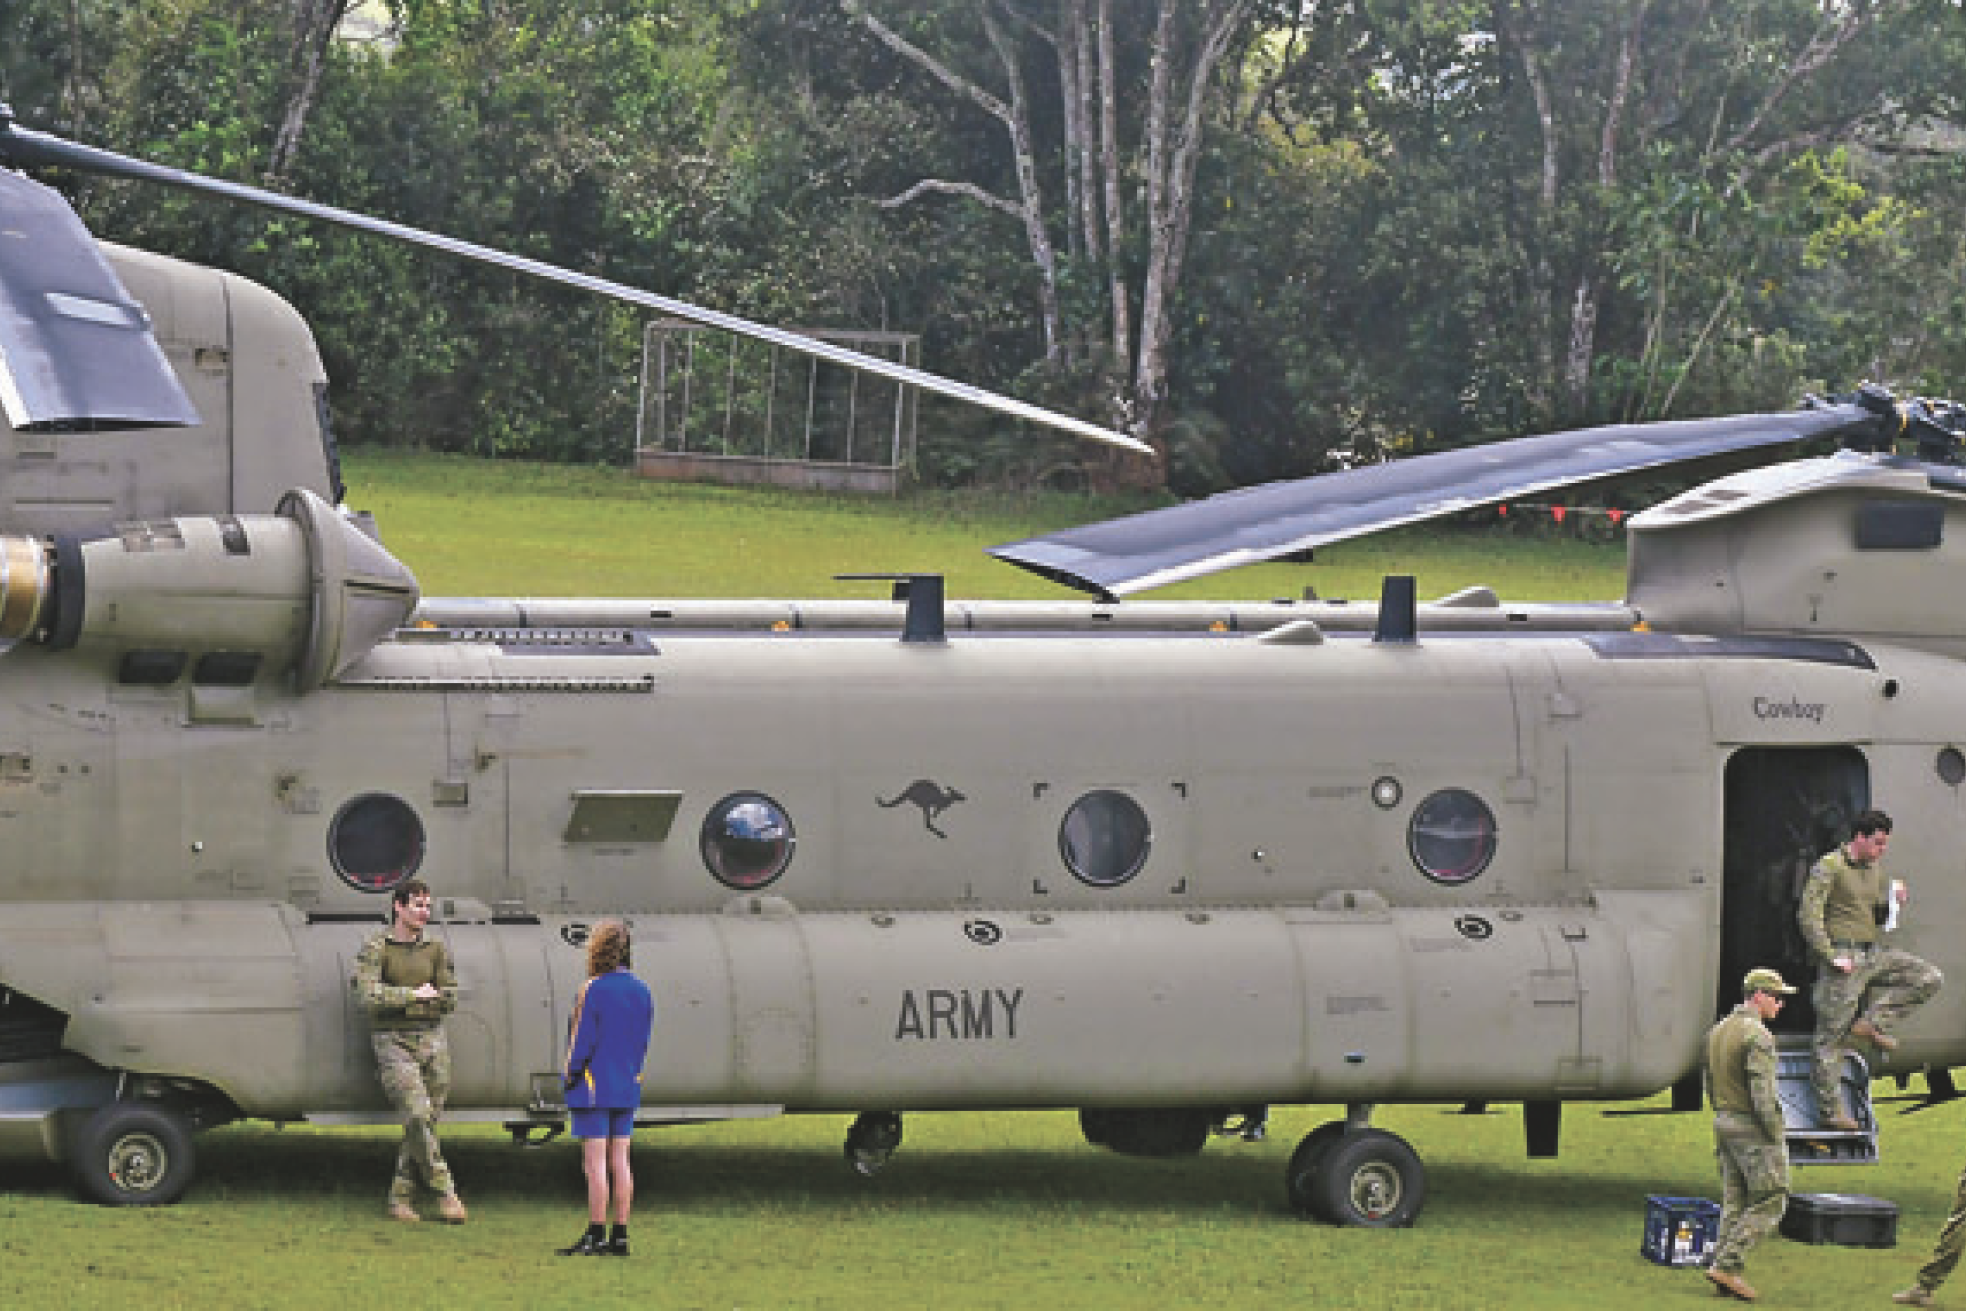 Chinook visit by military thrills school - feature photo